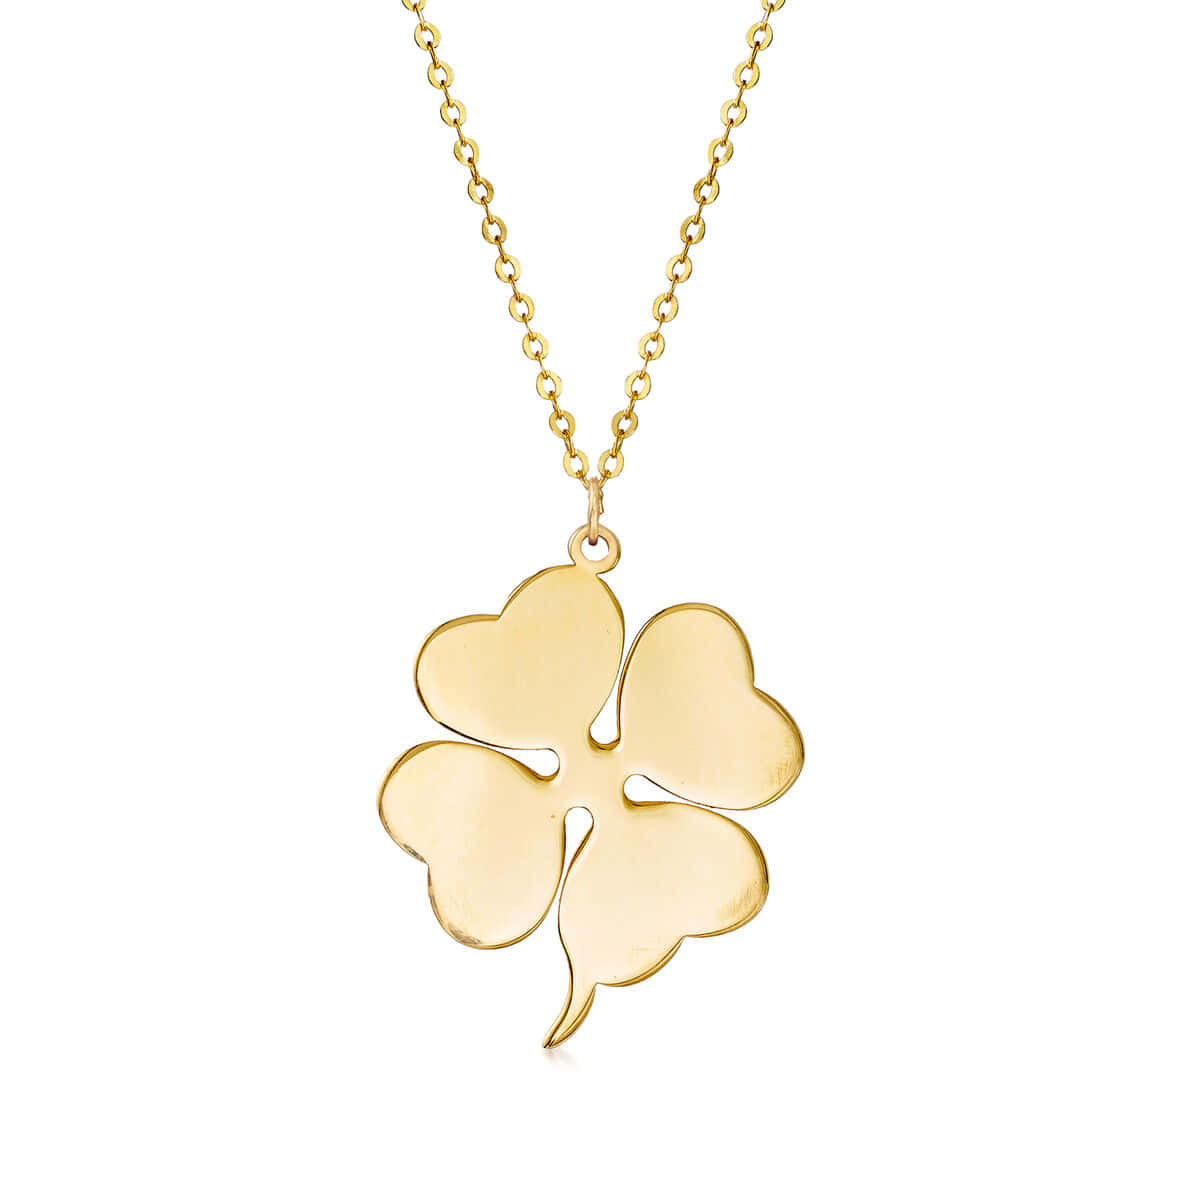 Green Four Leaf Gold Plated Chained Necklace Picture